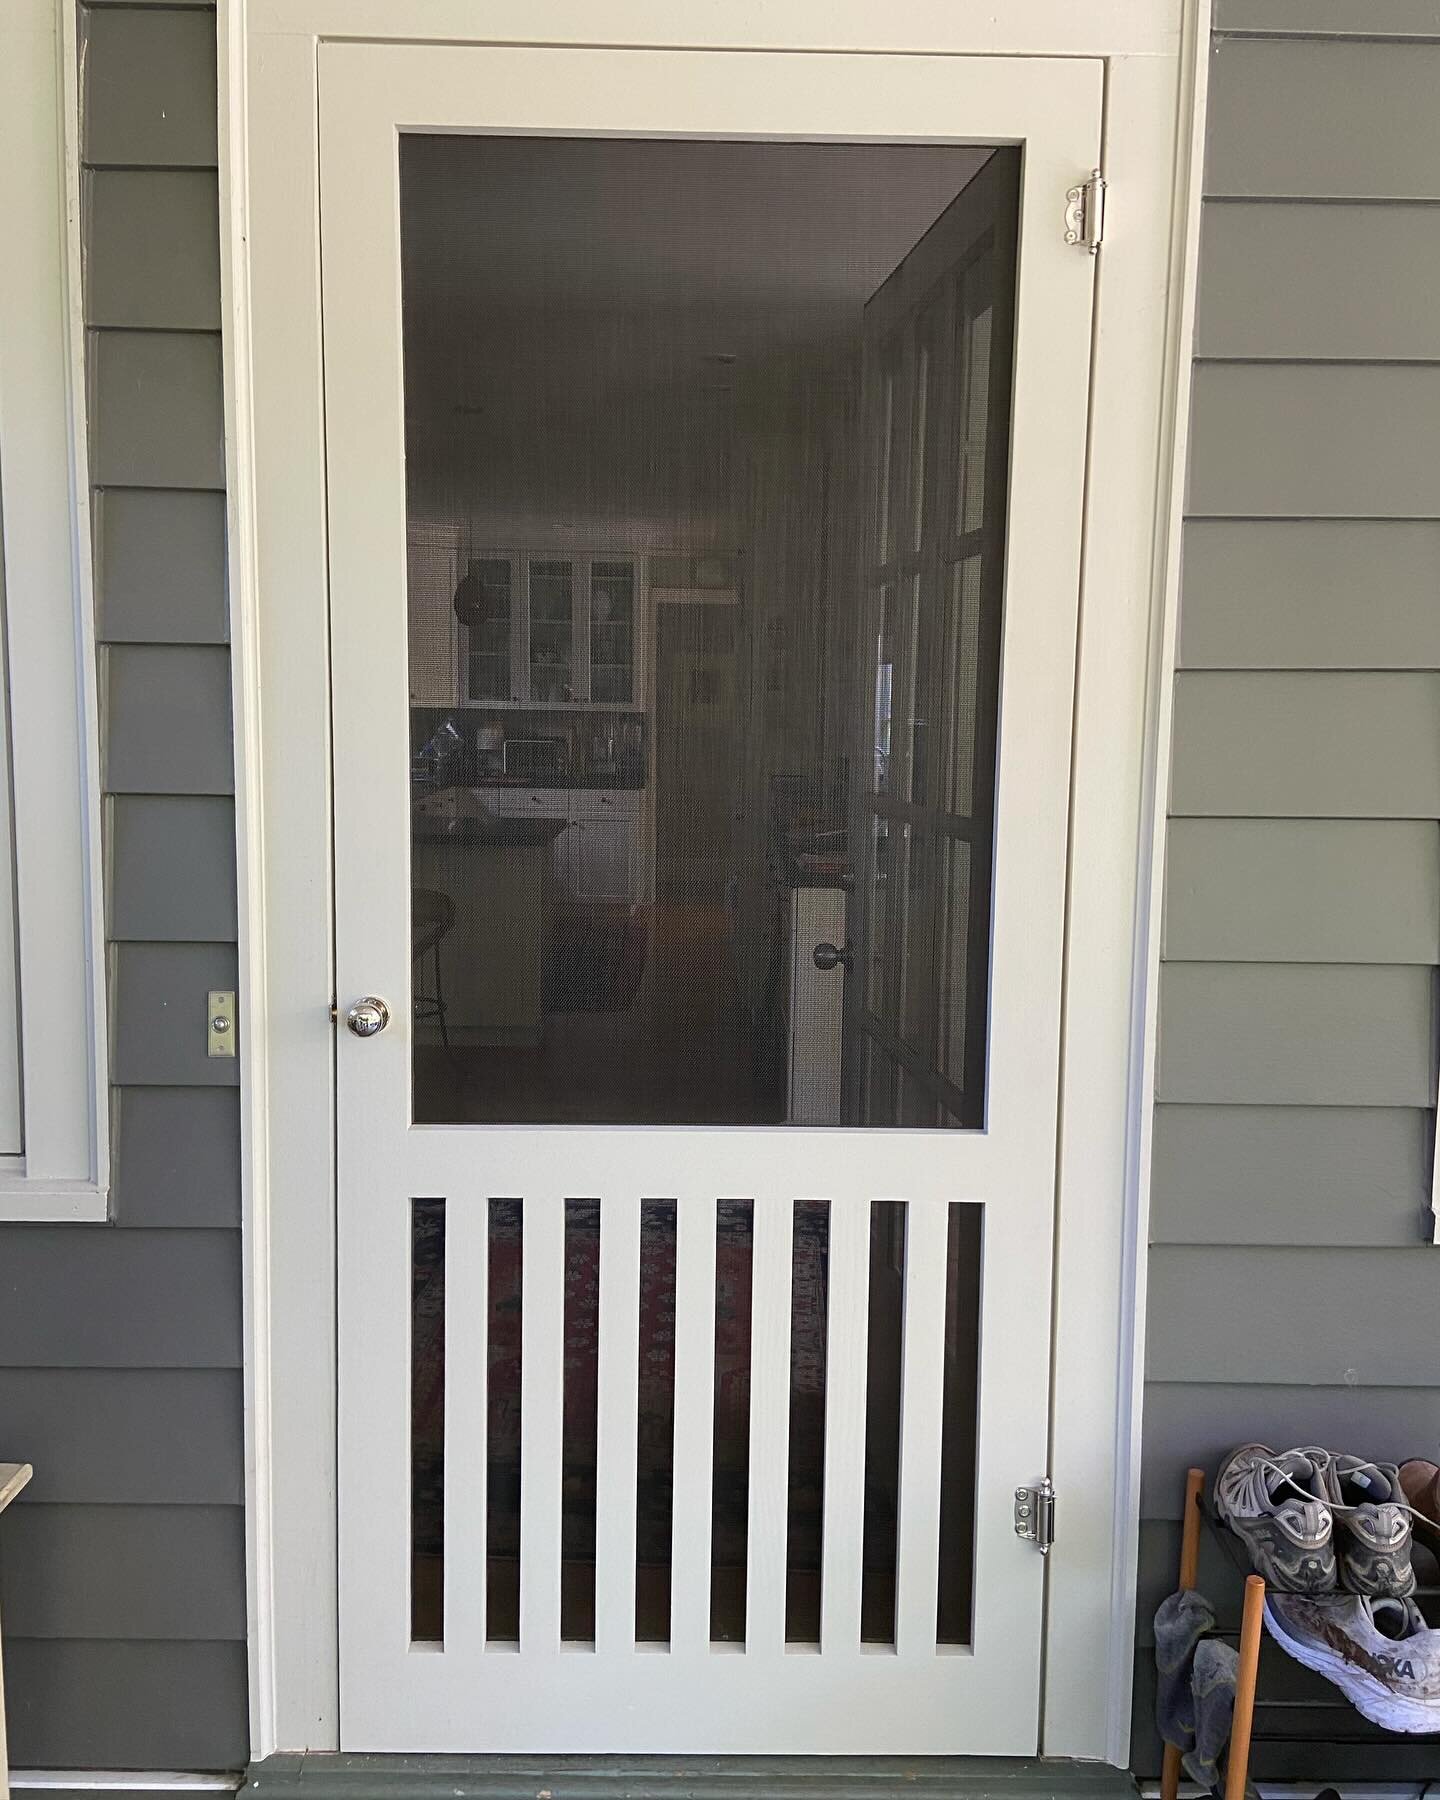 This custom Fannie-style screen door, color-matched to the trim, adds timeless sophistication to this Montlake home. With narrow rails inspired by the surrounding patio fence, it&rsquo;s both stylish and pet-friendly - keeping even their large dog at